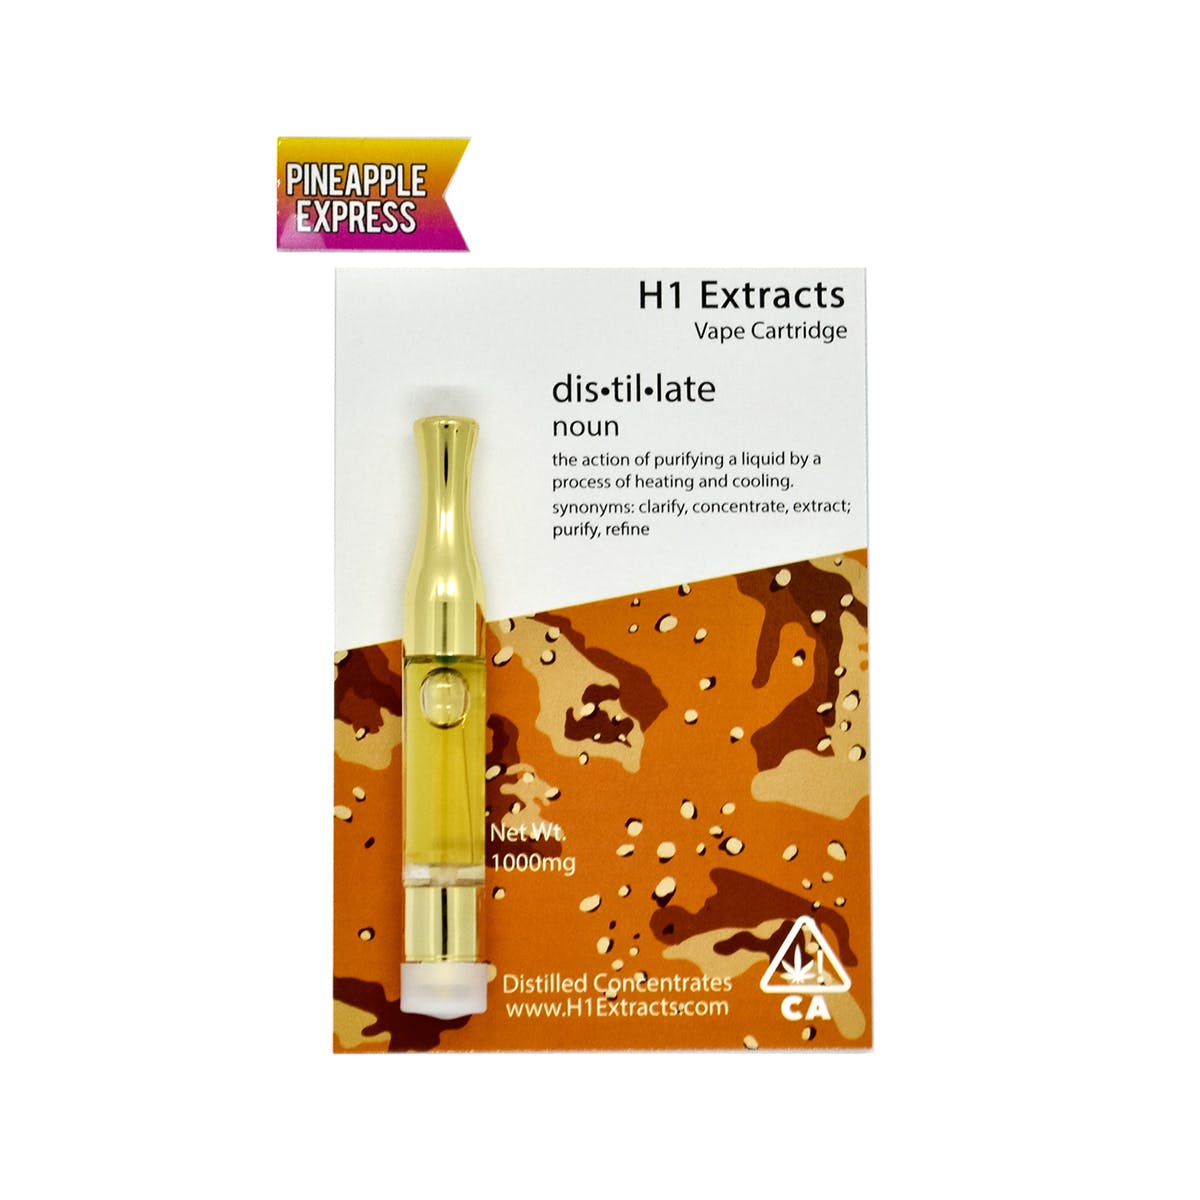 concentrate-h1-extracts-classic-pineapple-express-cartridge